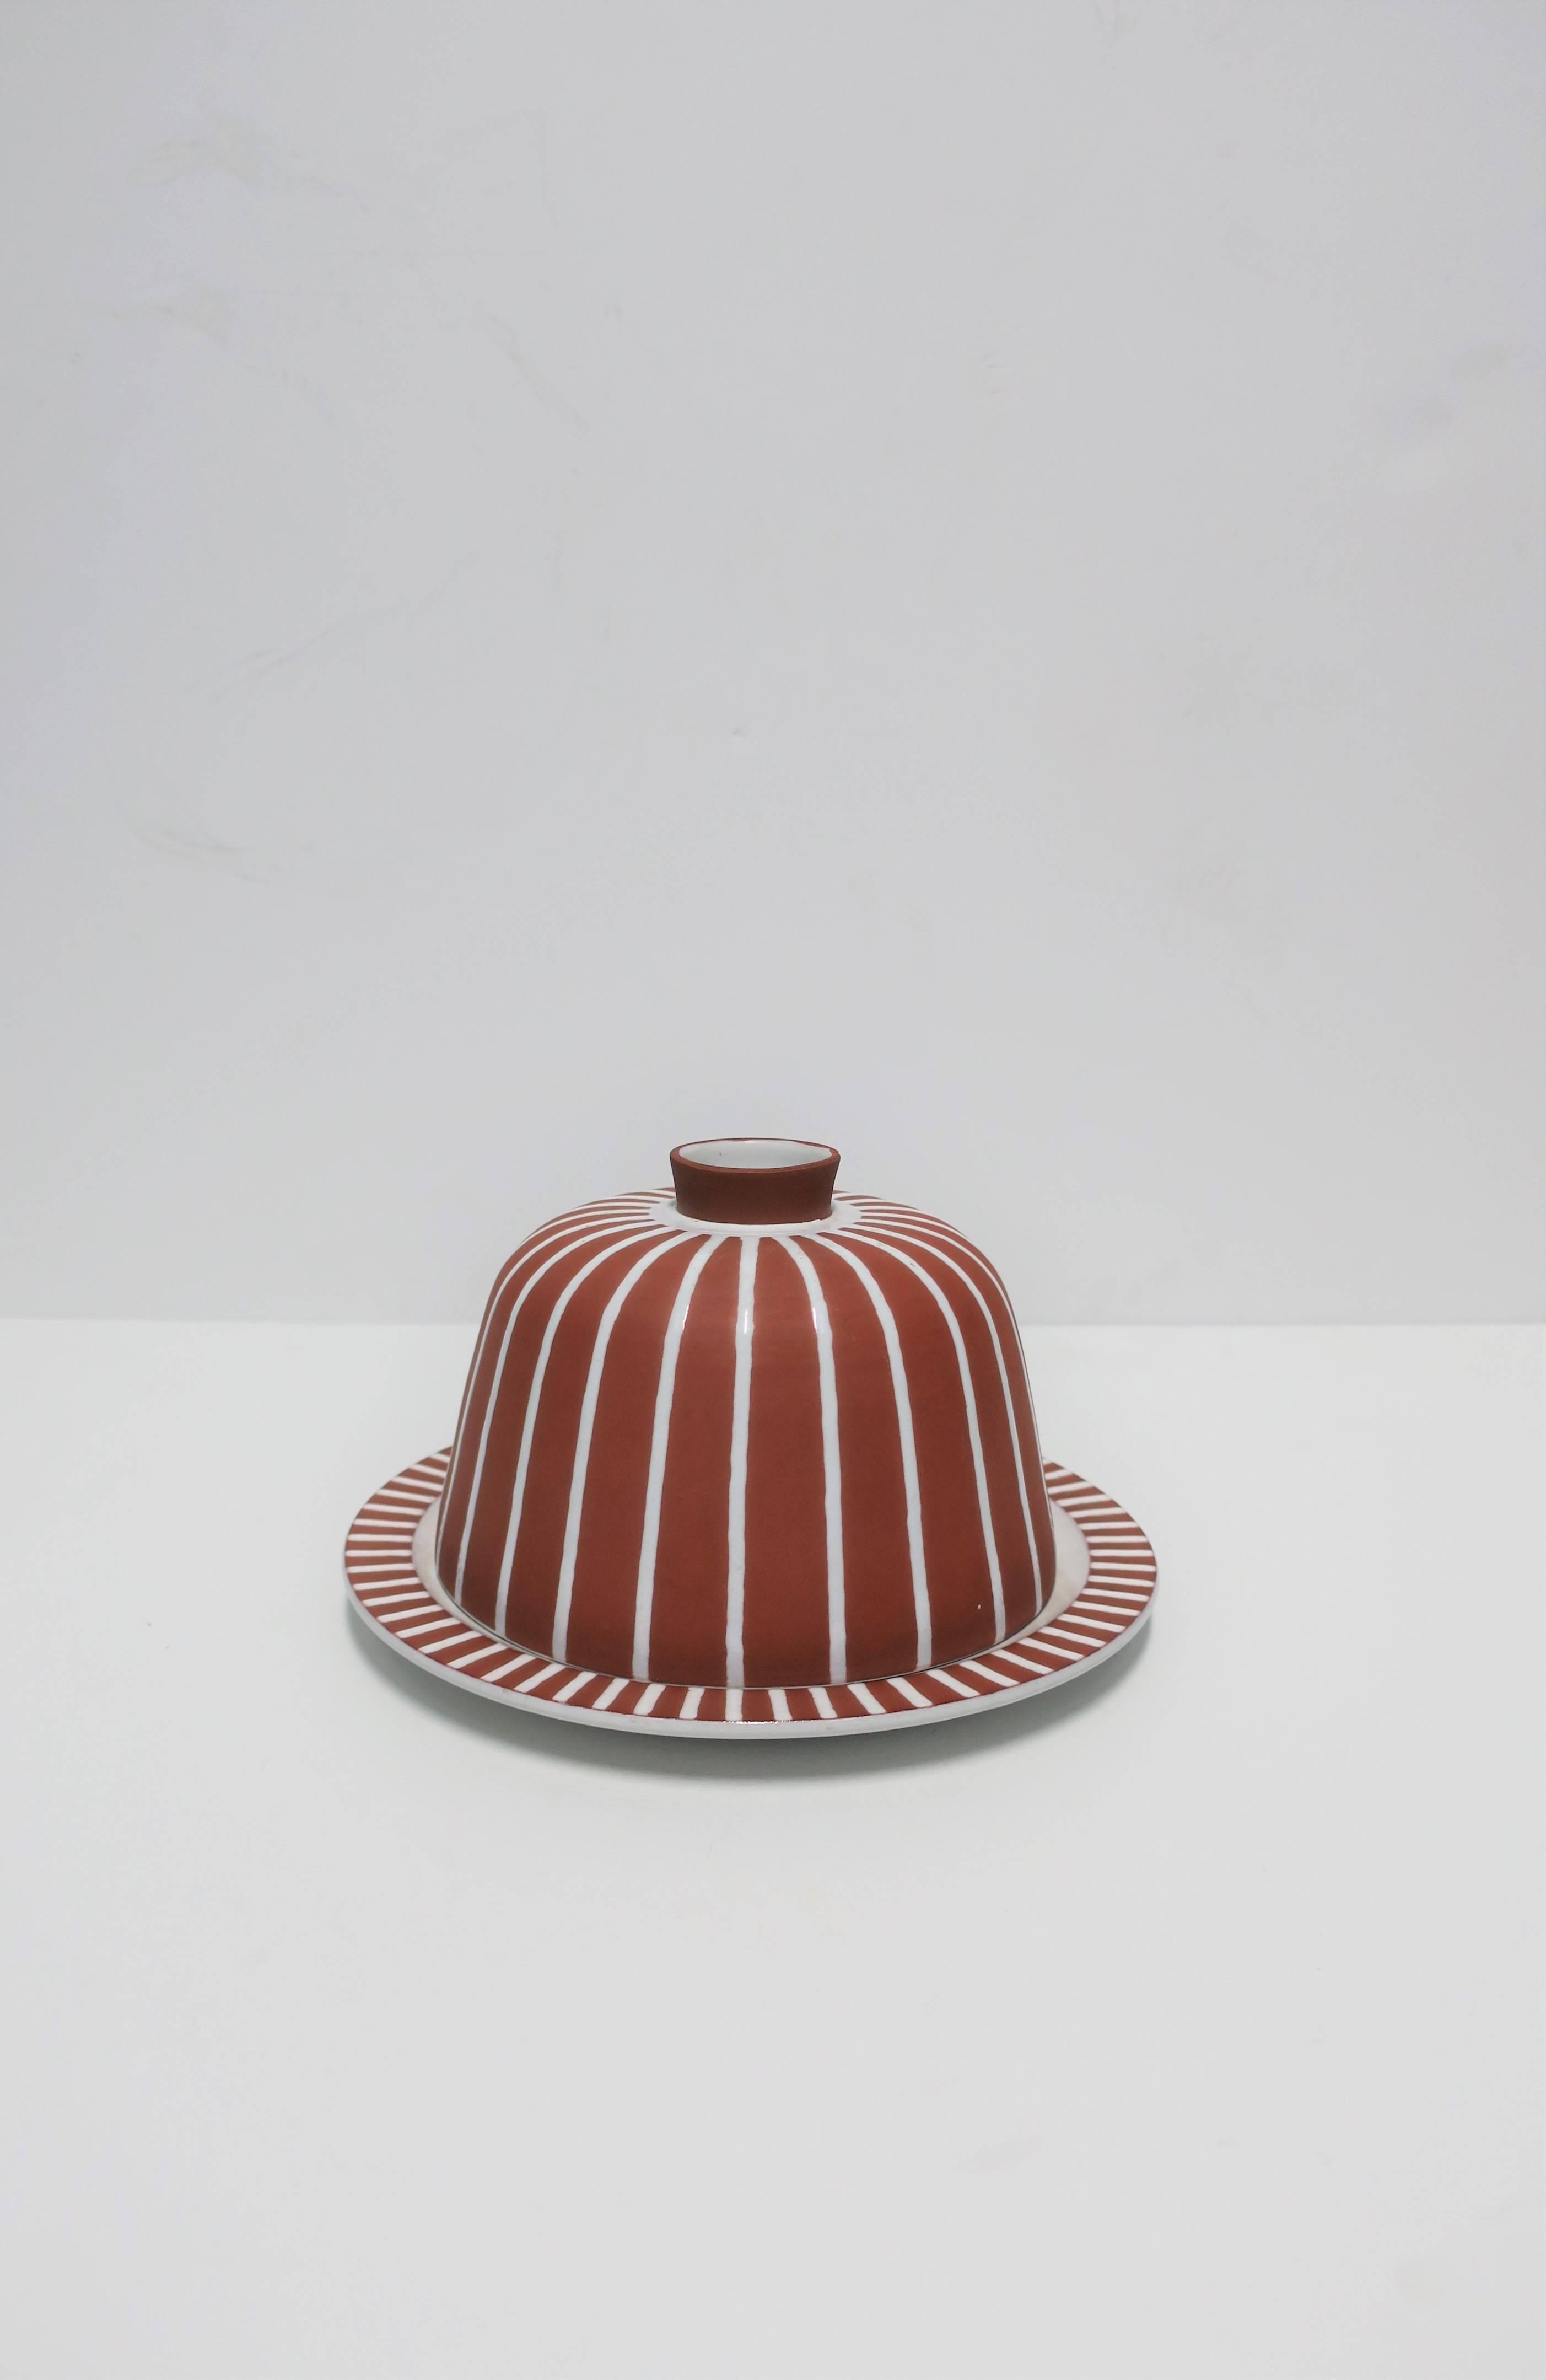 A beautiful Danish terracotta pottery cheese, cake, dessert or pastry dome and plate, made in Denmark, circa Mid to Late 20th Century. Piece is marked on bottom, see image #9.

Piece measures: 8.75 in. Diameter x 5.50 in. H

  